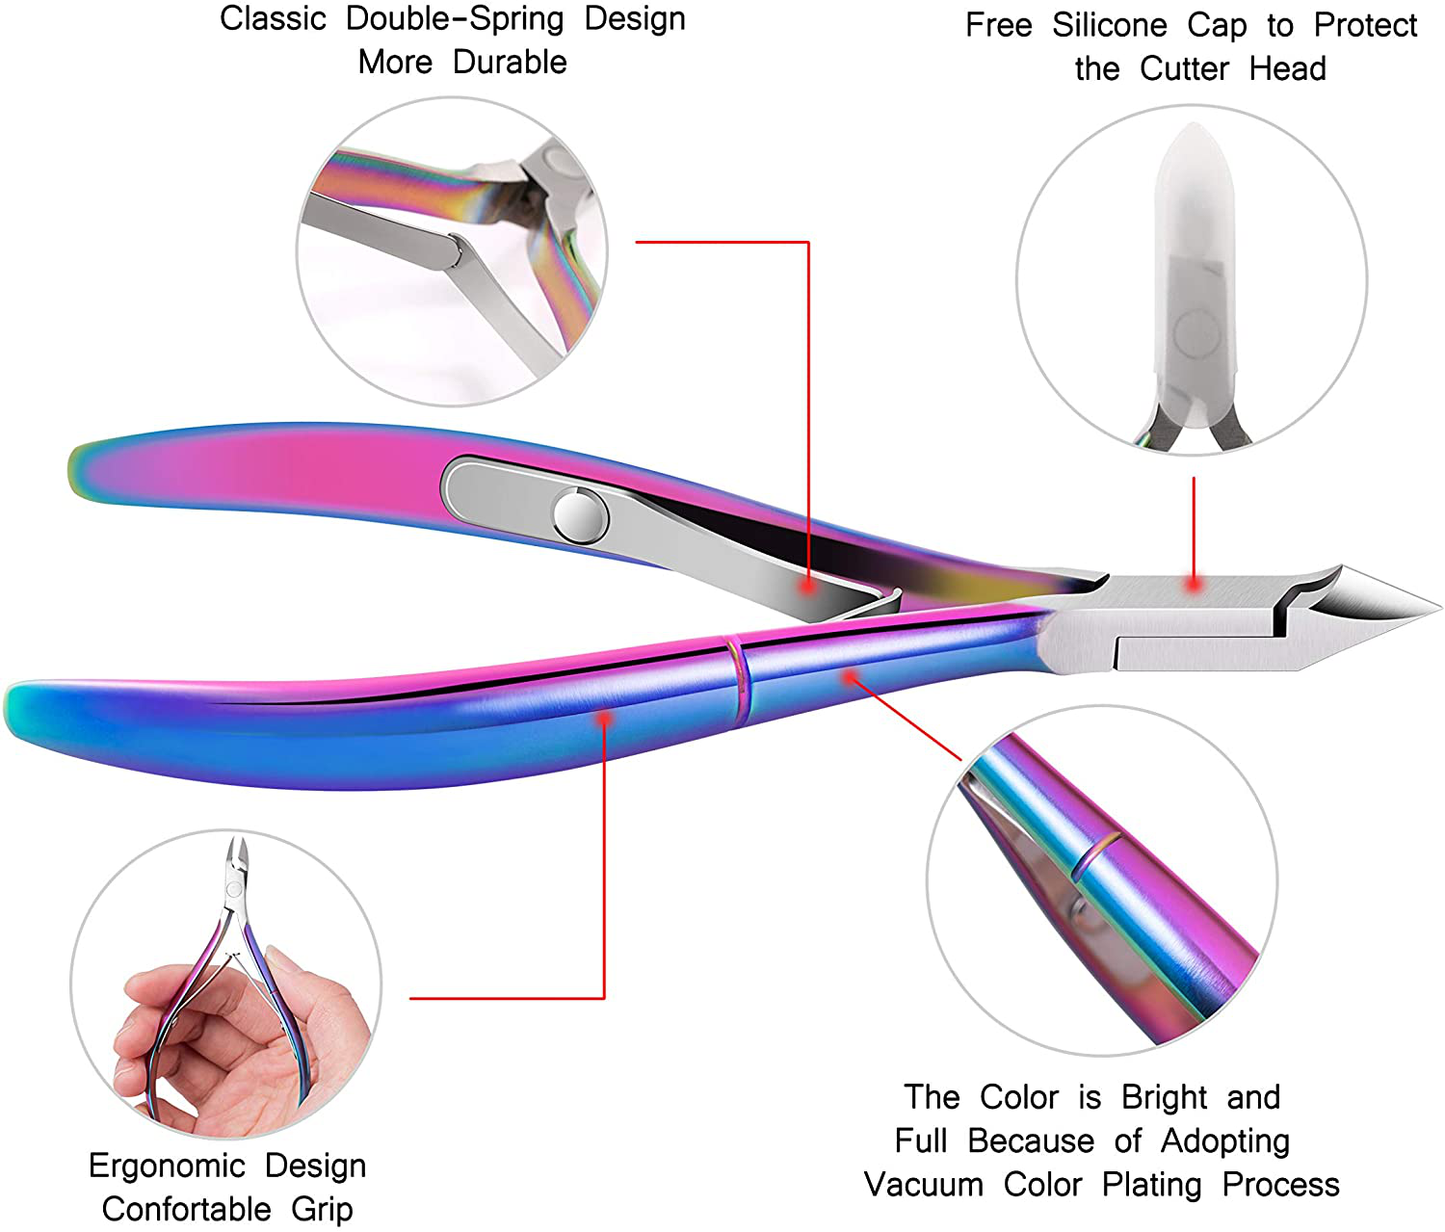 Cuticle Trimmer with Cuticle Pusher - Magicyee Chameleon Cuticle Cutter Cuticle Nipper Professional Cuticle Remover Valued Manicure Tools Set Dead Skin Remover Cuticle Clippers Best Gift